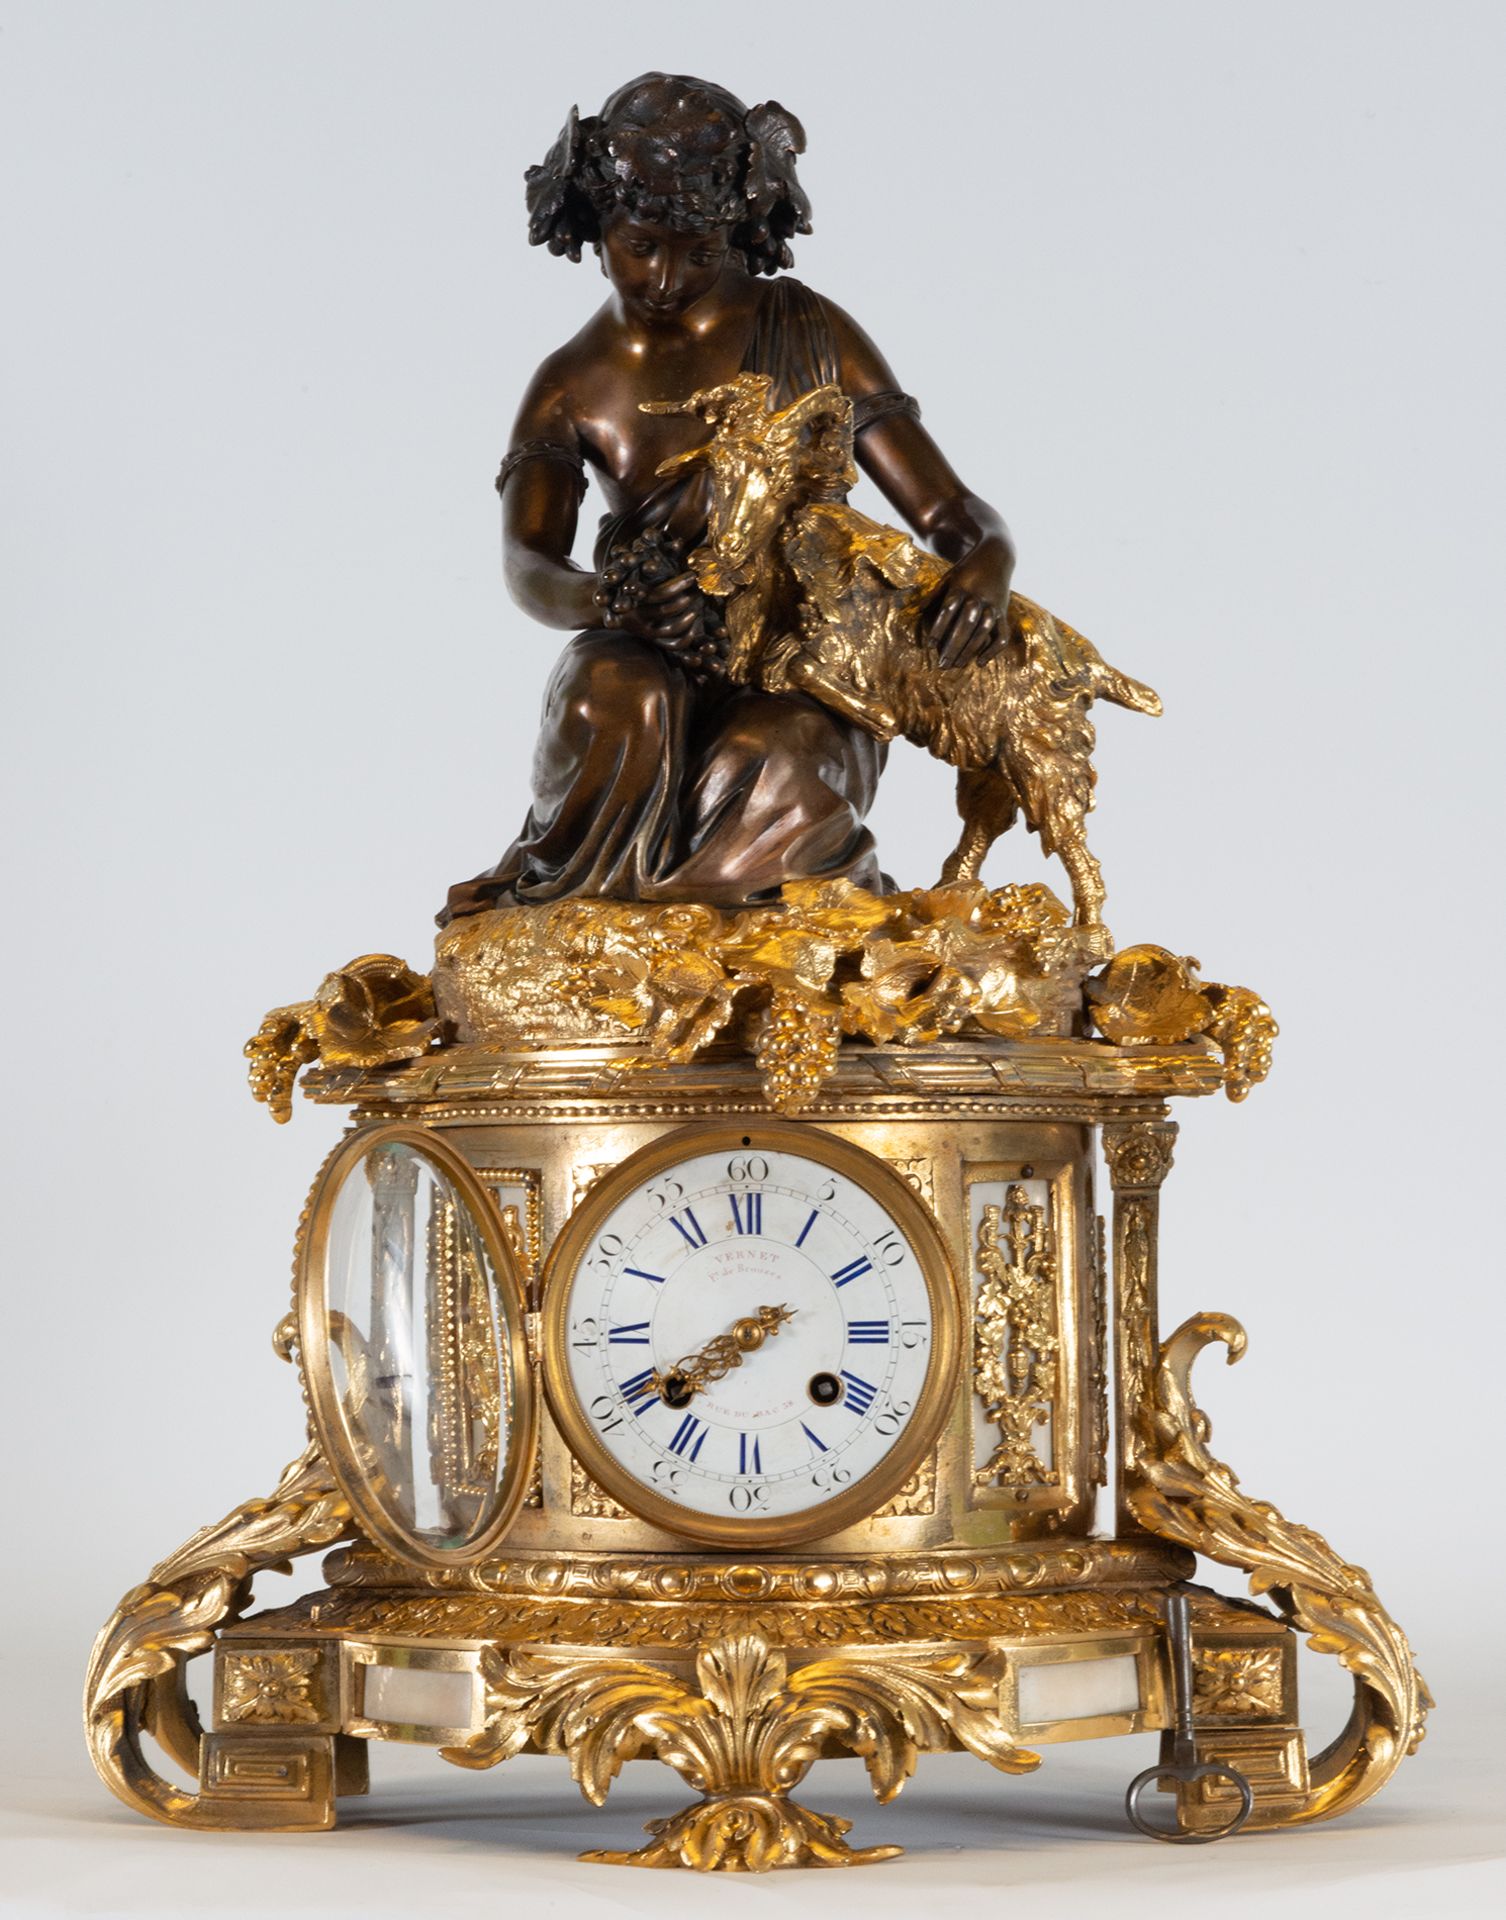 Exceptional Large French Tabletop Clock depicting Bacchus with Ram, Paris Machinery, circa 19th cent - Image 5 of 7